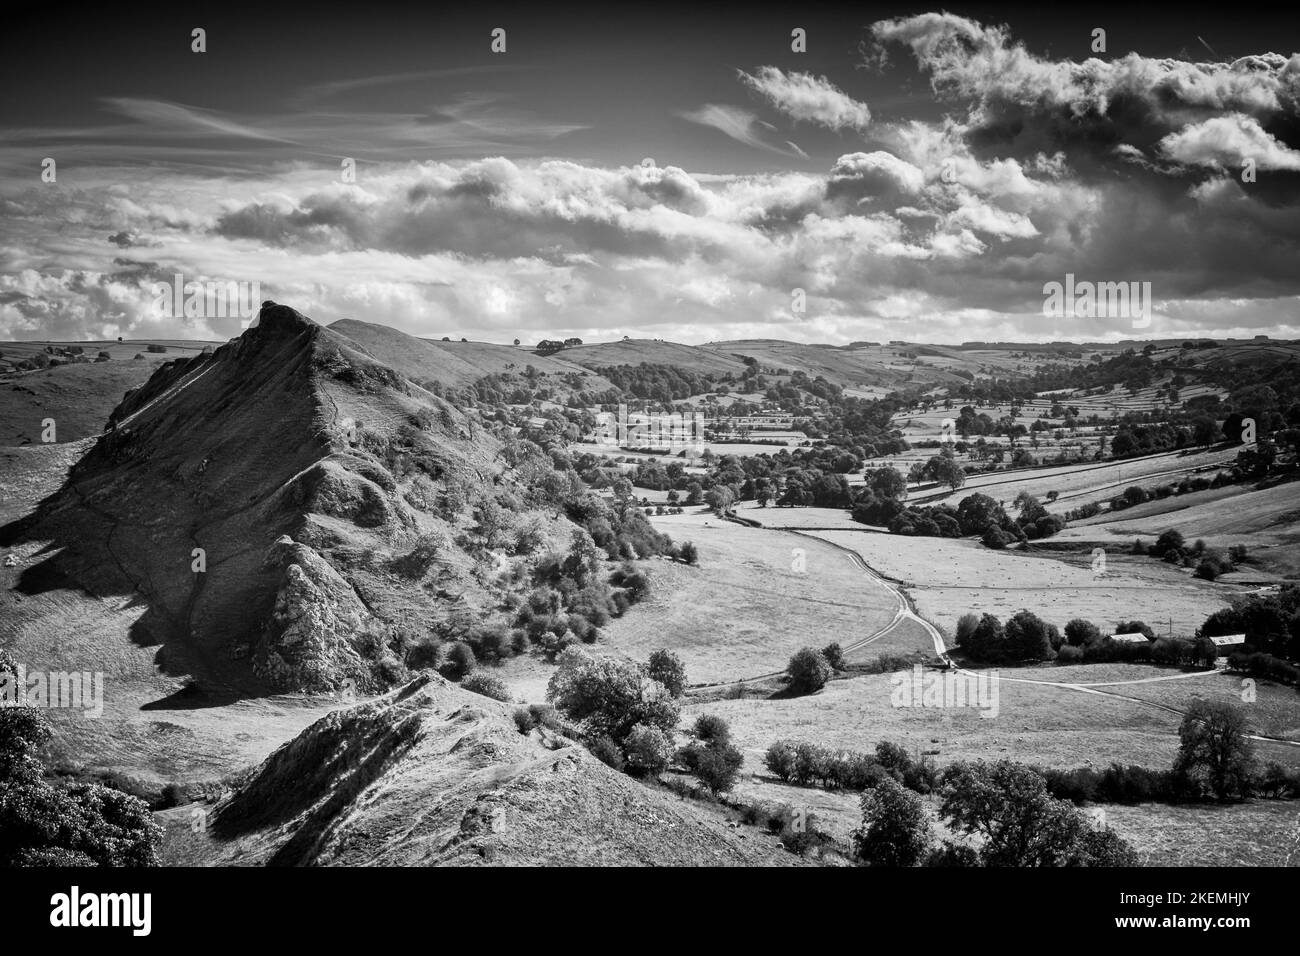 Parkhouse Hill taken from the lower slopes of Chrome Hill in the Peak District. A fabulous and surprisingly tough walk for just a couple of hills. Stock Photo